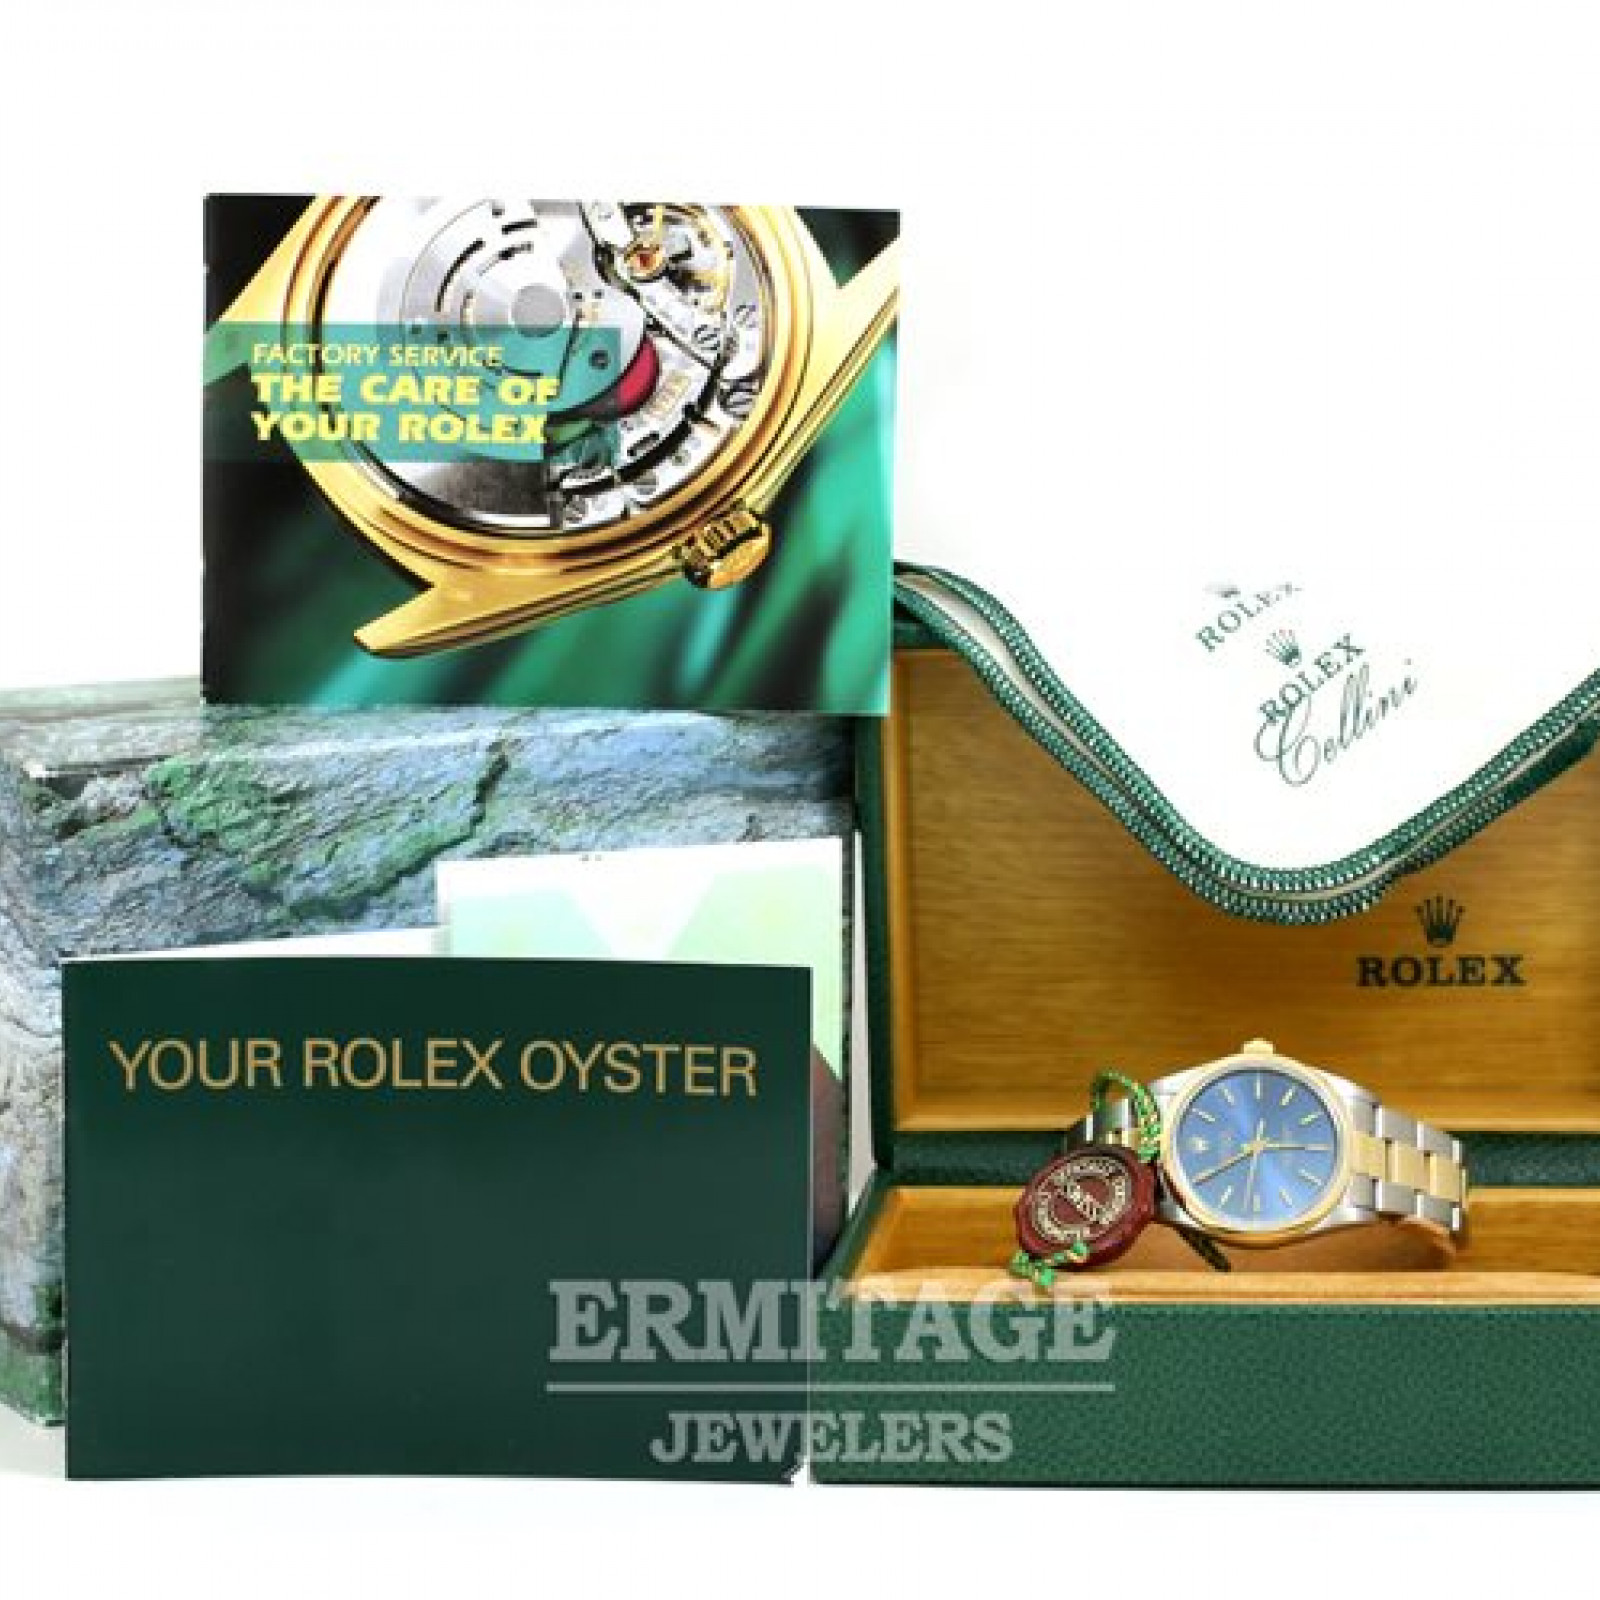 Rolex Oyster Perpetual 14203M Gold & Steel